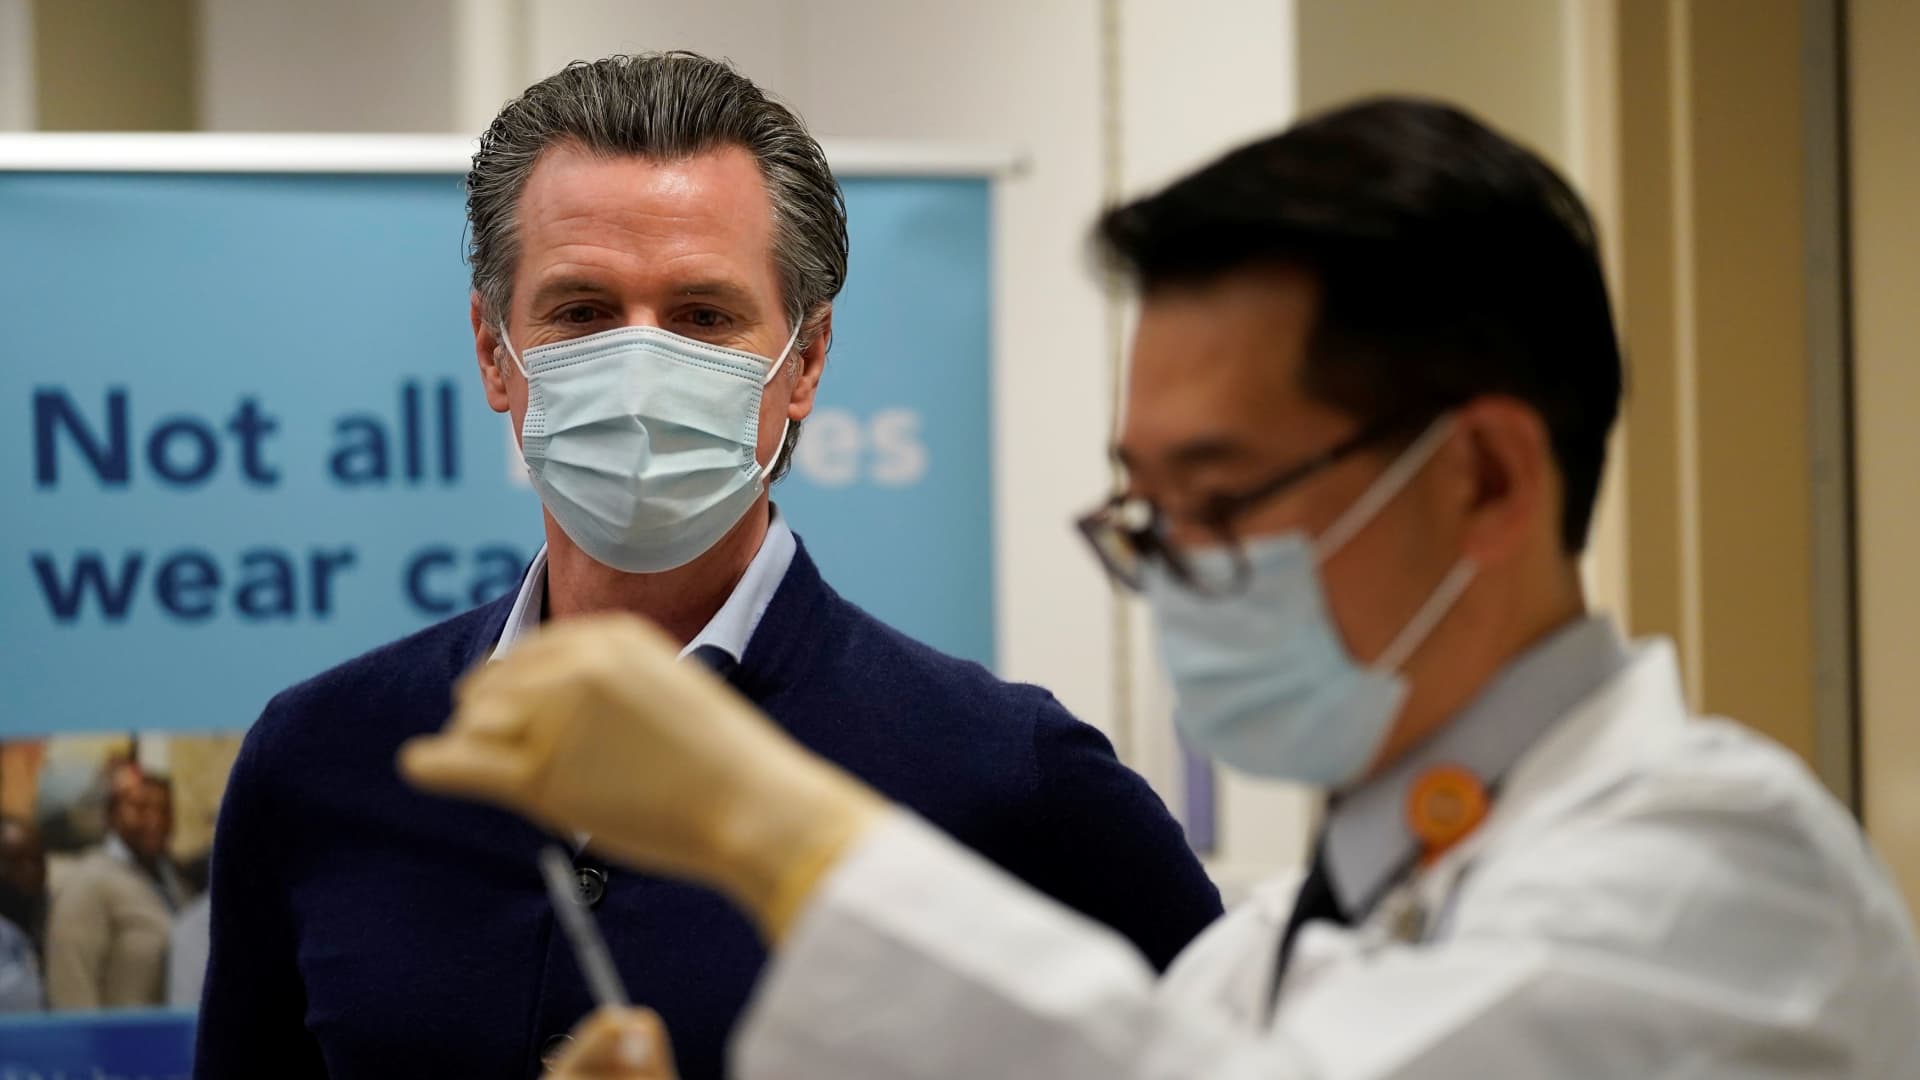 Gov. Gavin Newsom watches as the Pfizer-BioNTech COVID-19 vaccine is prepared by Director of Inpatient Pharmacy David Cheng at Kaiser Permanente Los Angeles Medical Center in Los Angeles, California, U.S. December 14, 2020.